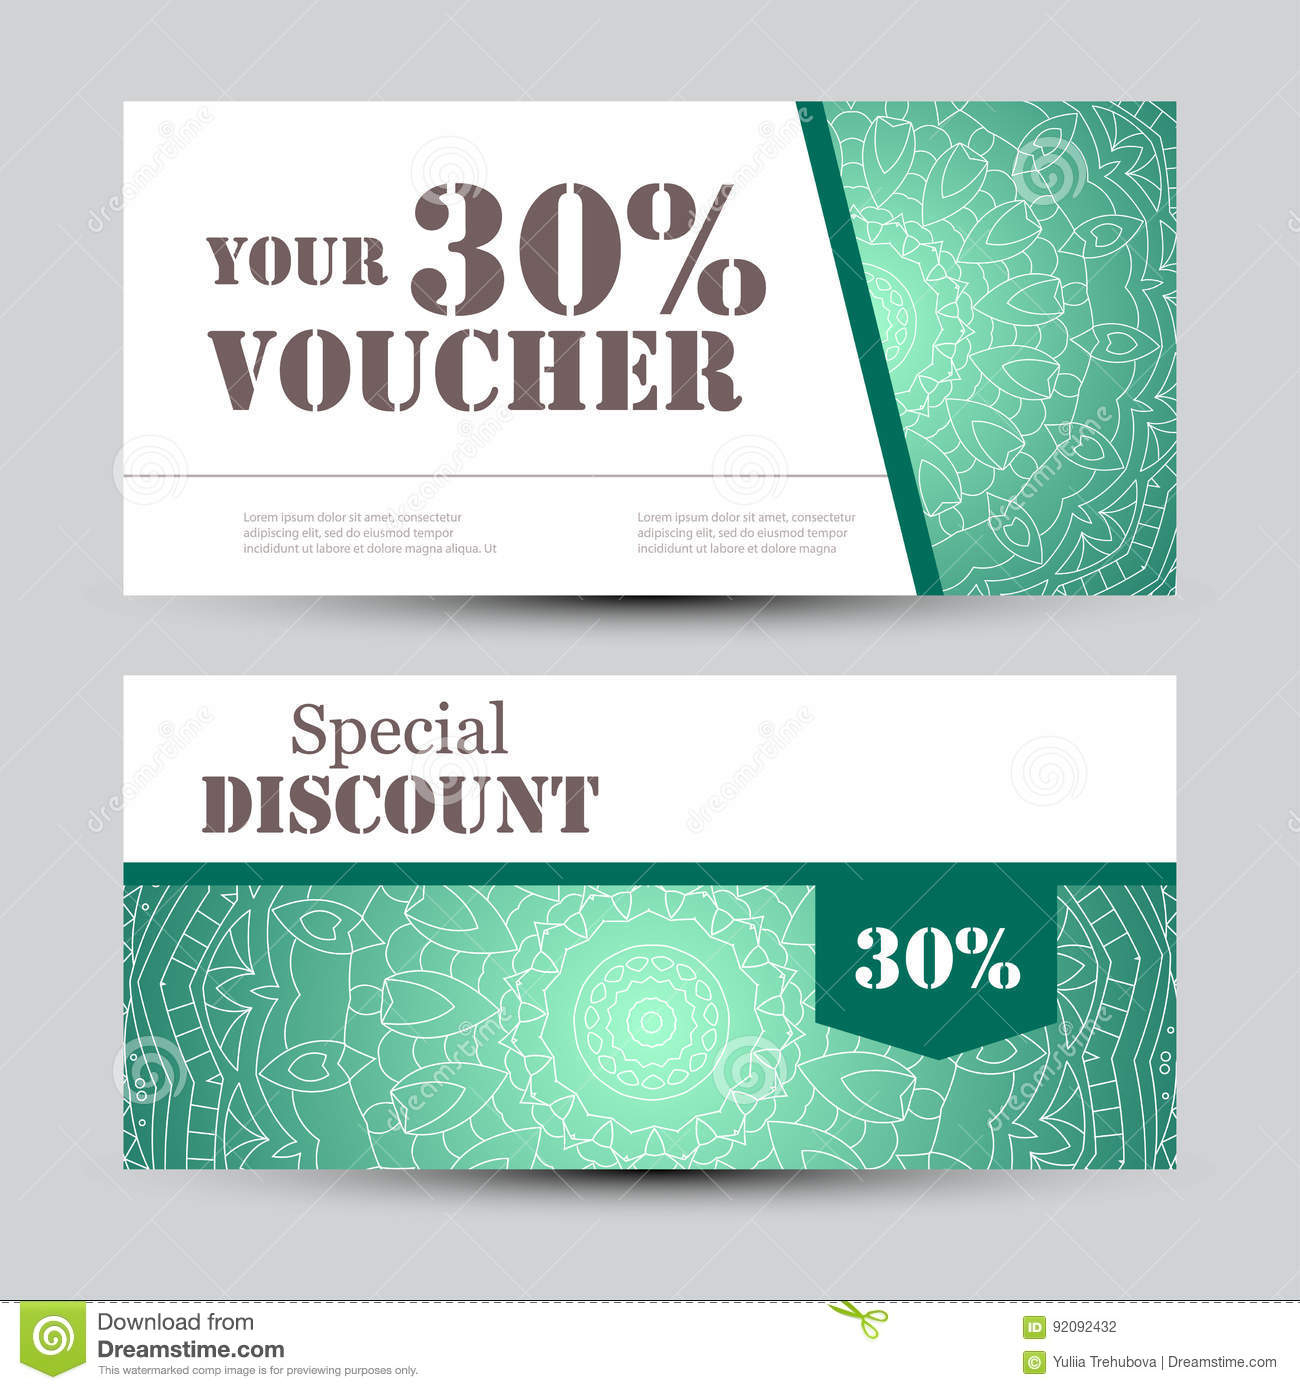 Gift Voucher Template With Mandala. Design Certificate For For Magazine Subscription Gift Certificate Template